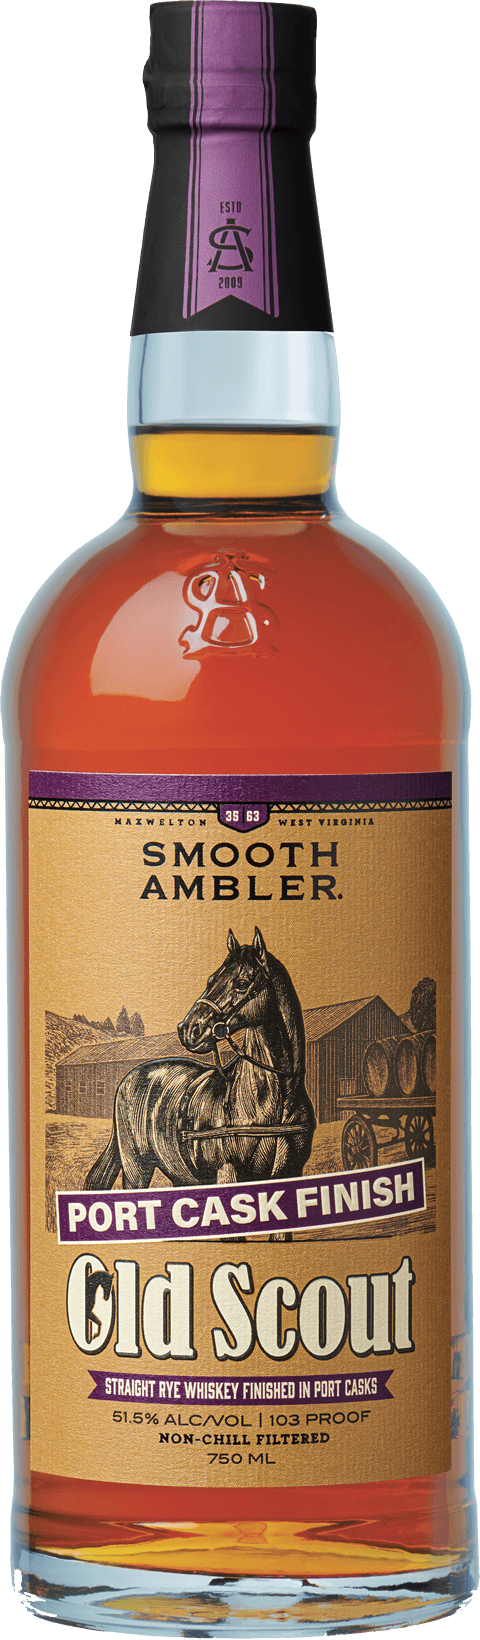 smooth-ambler-old-scout-port-cask-finish-rye-whiskey-page-bottle